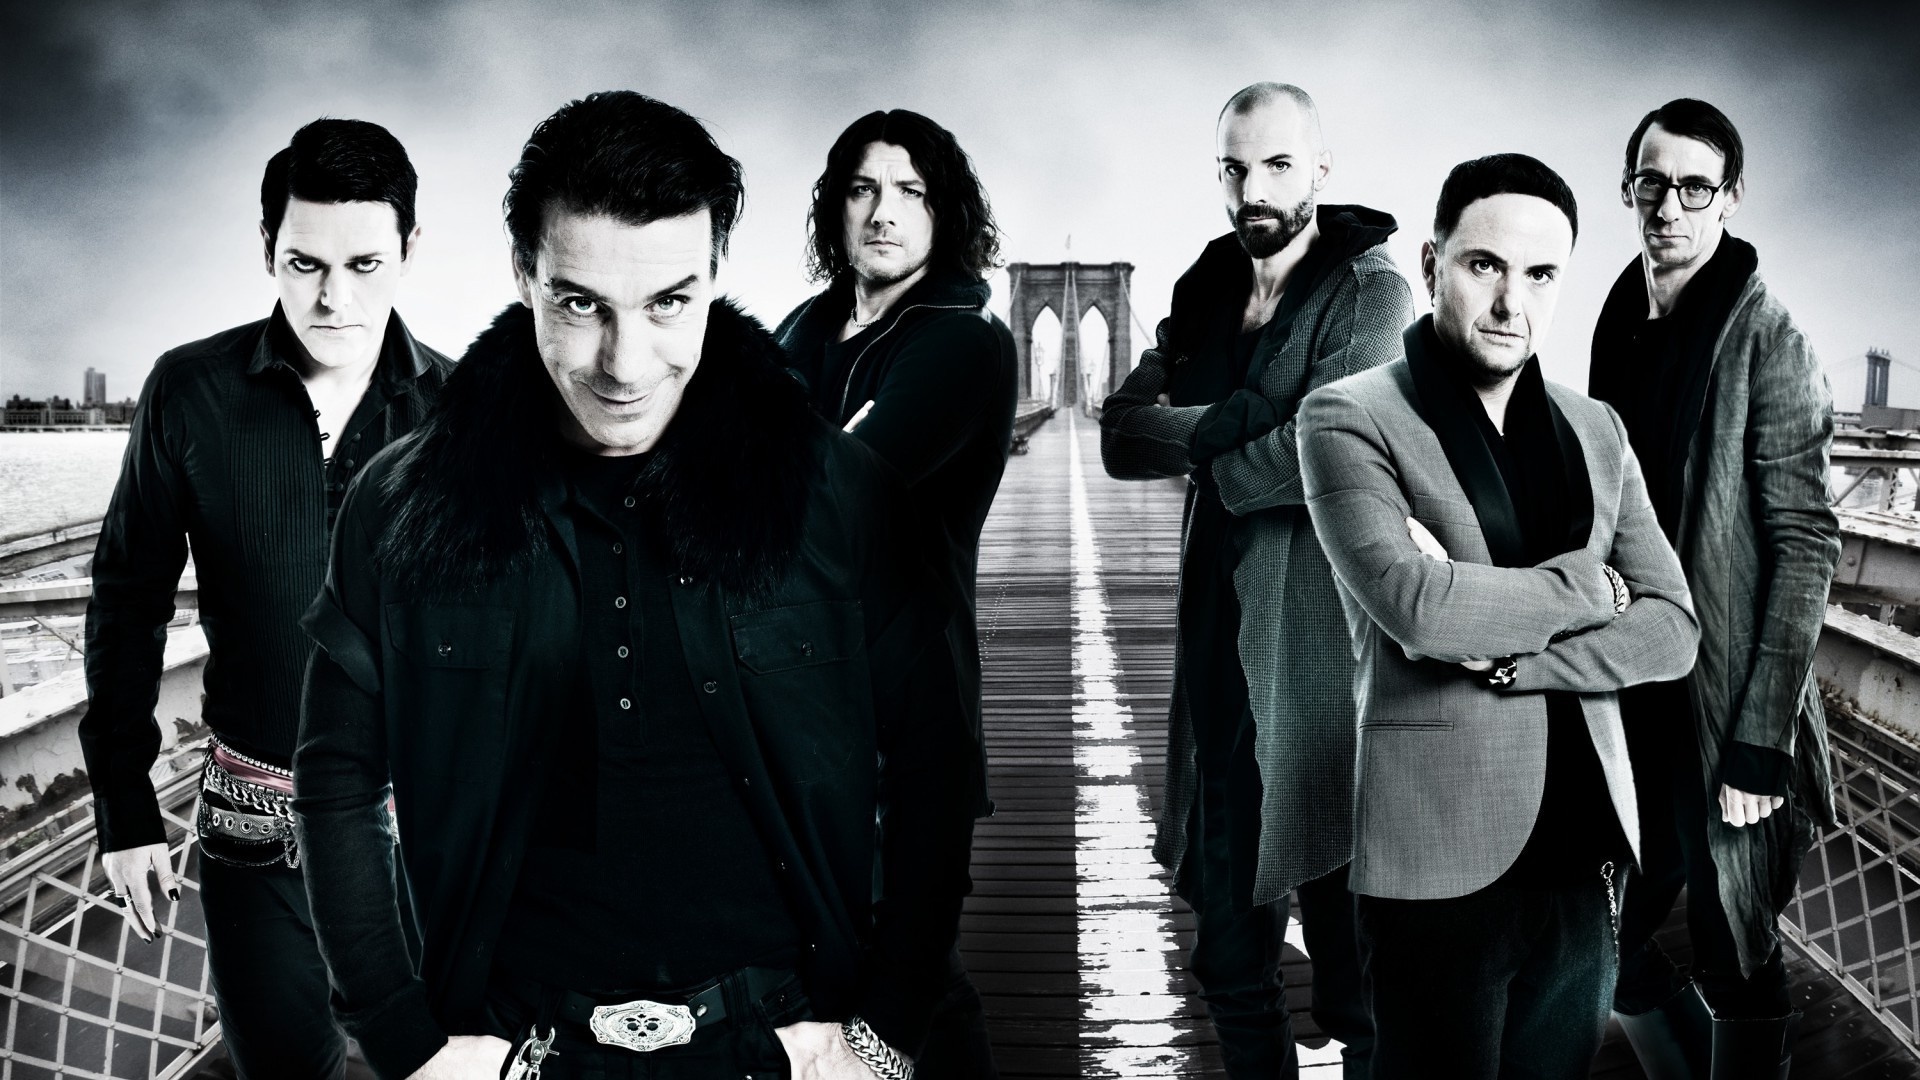 Rammstein: The band's brand of muscular metal hits, Mutter, Black and white. 1920x1080 Full HD Wallpaper.